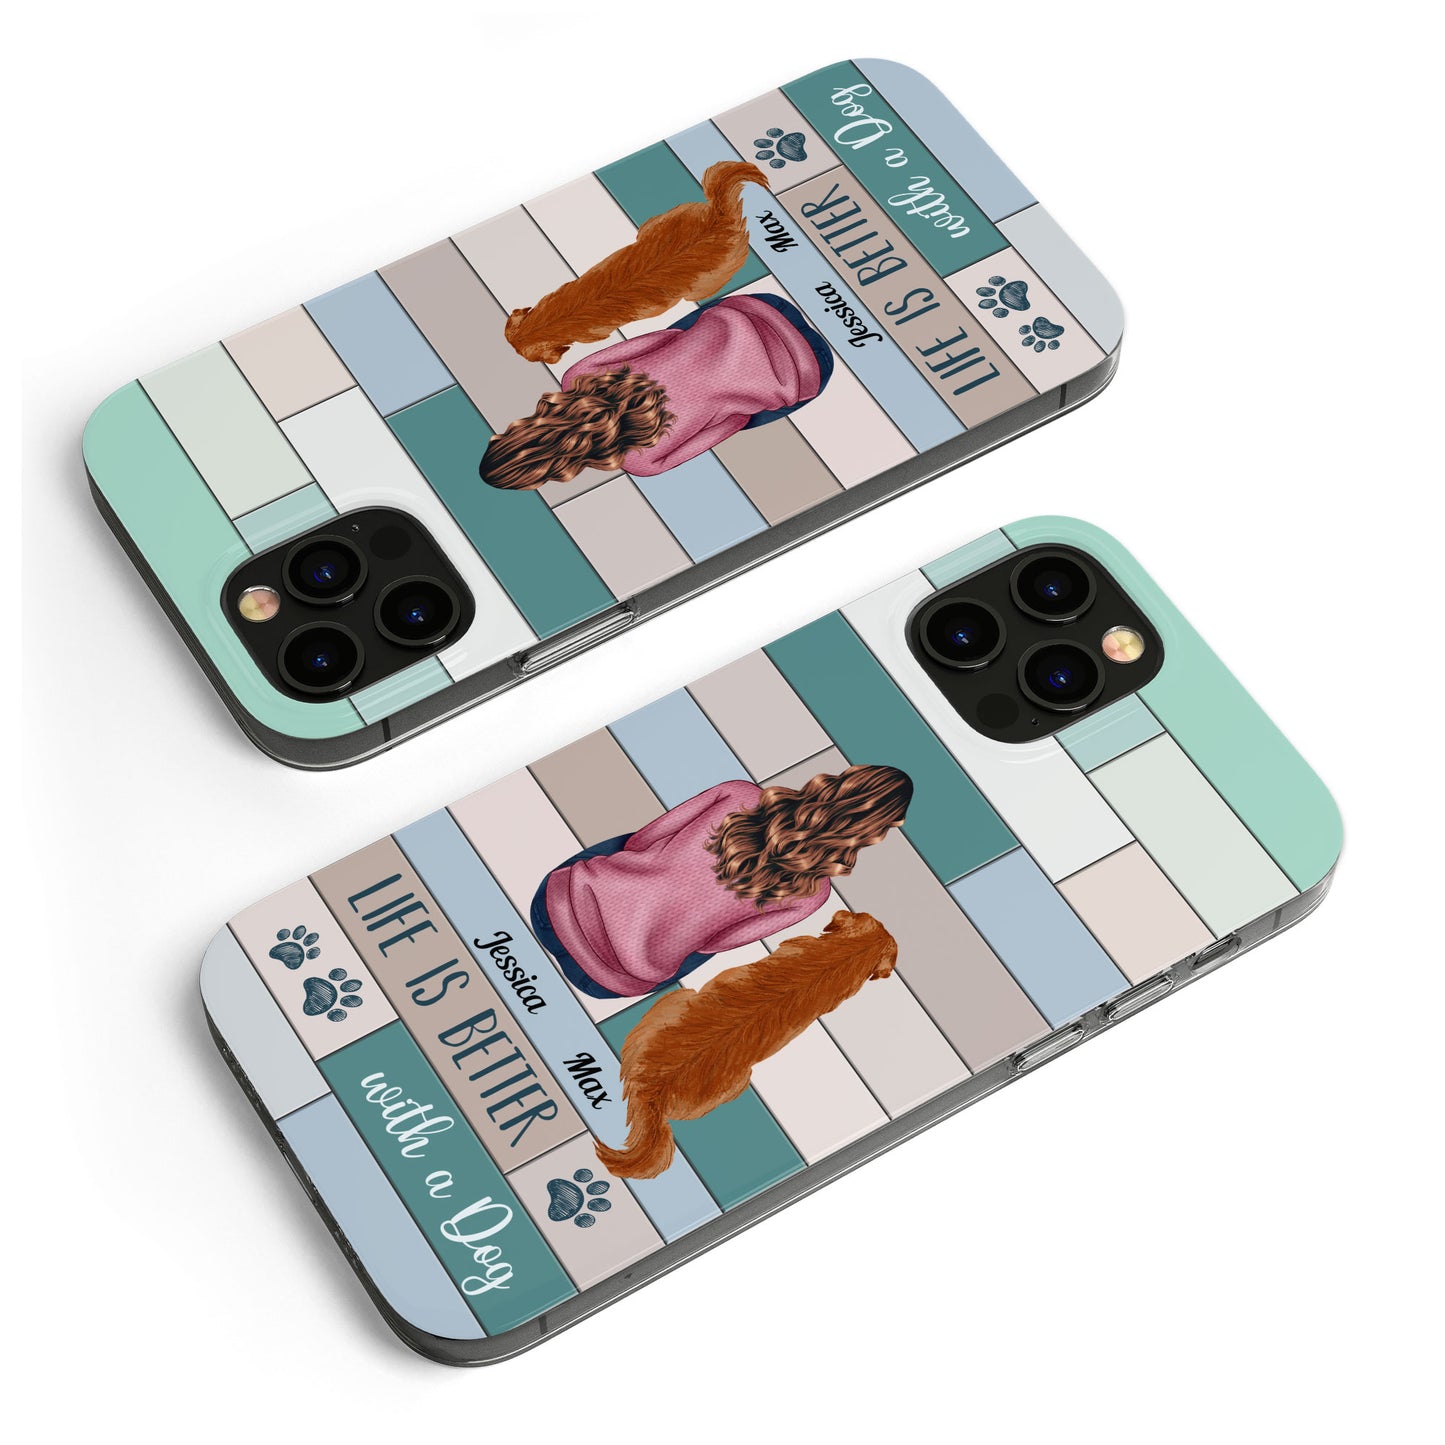 Life Is Better With Fur Babies - Personalized Clear Phone Case